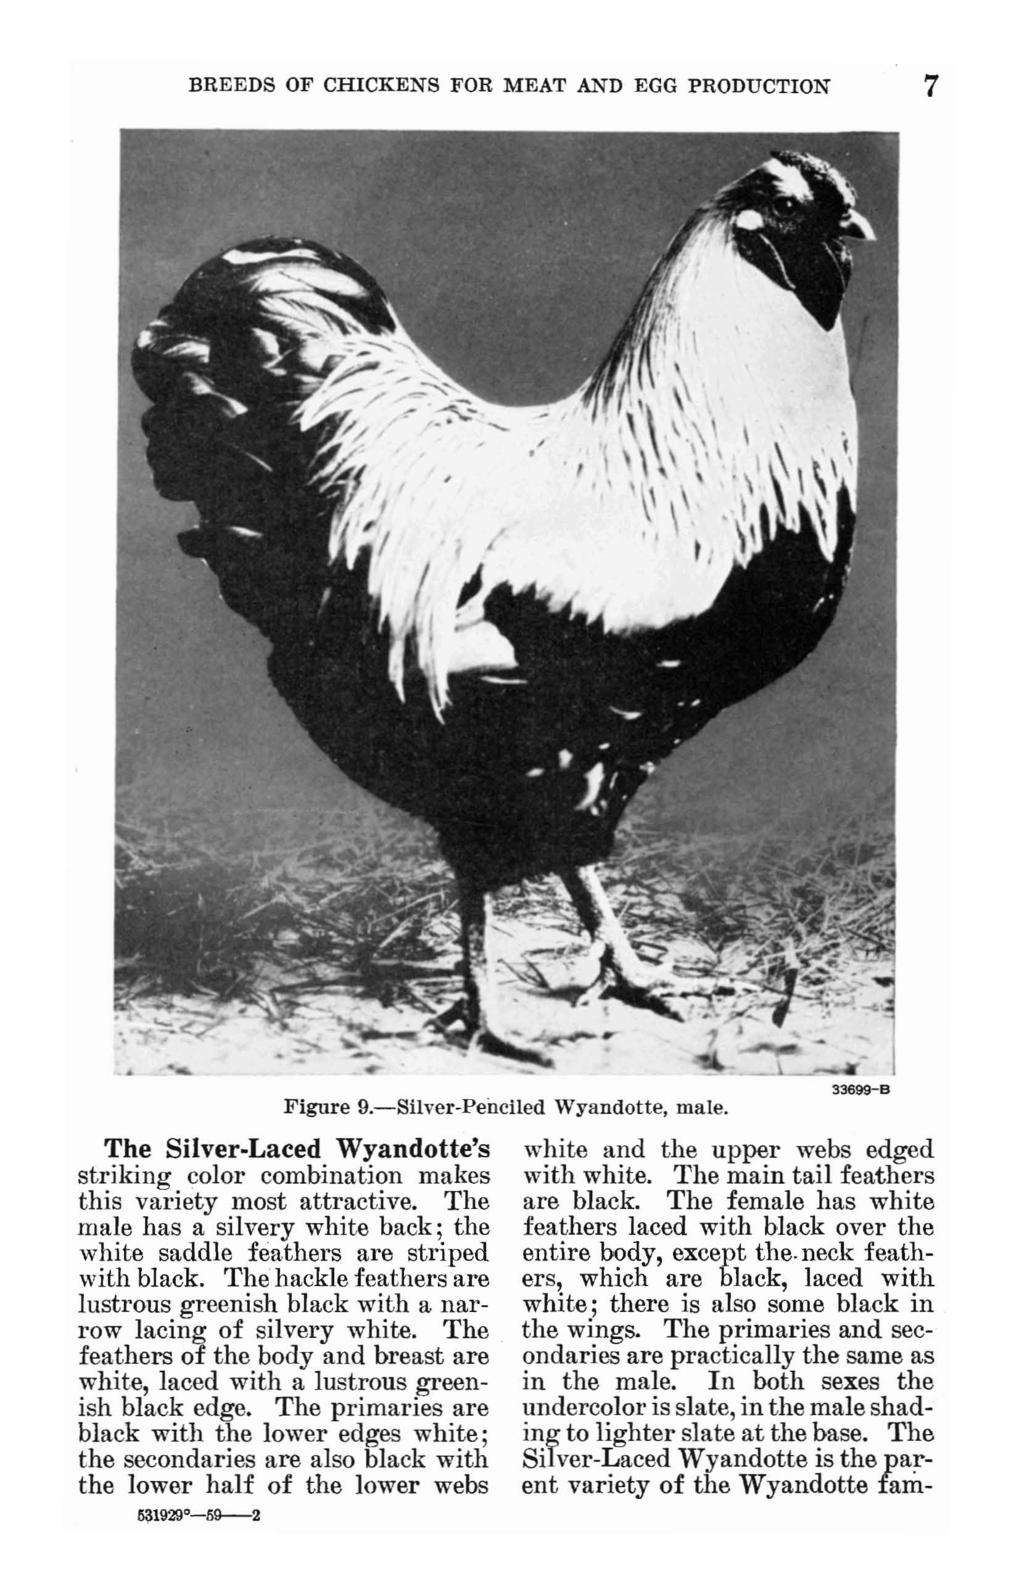 BREEDS OF CHICKENS FOR MEAT AND EGG PRODUCTION 7 Figure 9.-Silver-Penciled Wyandotte, male. The Silver-Laced Wyandotte's striking color combination makes this variety most attractive.